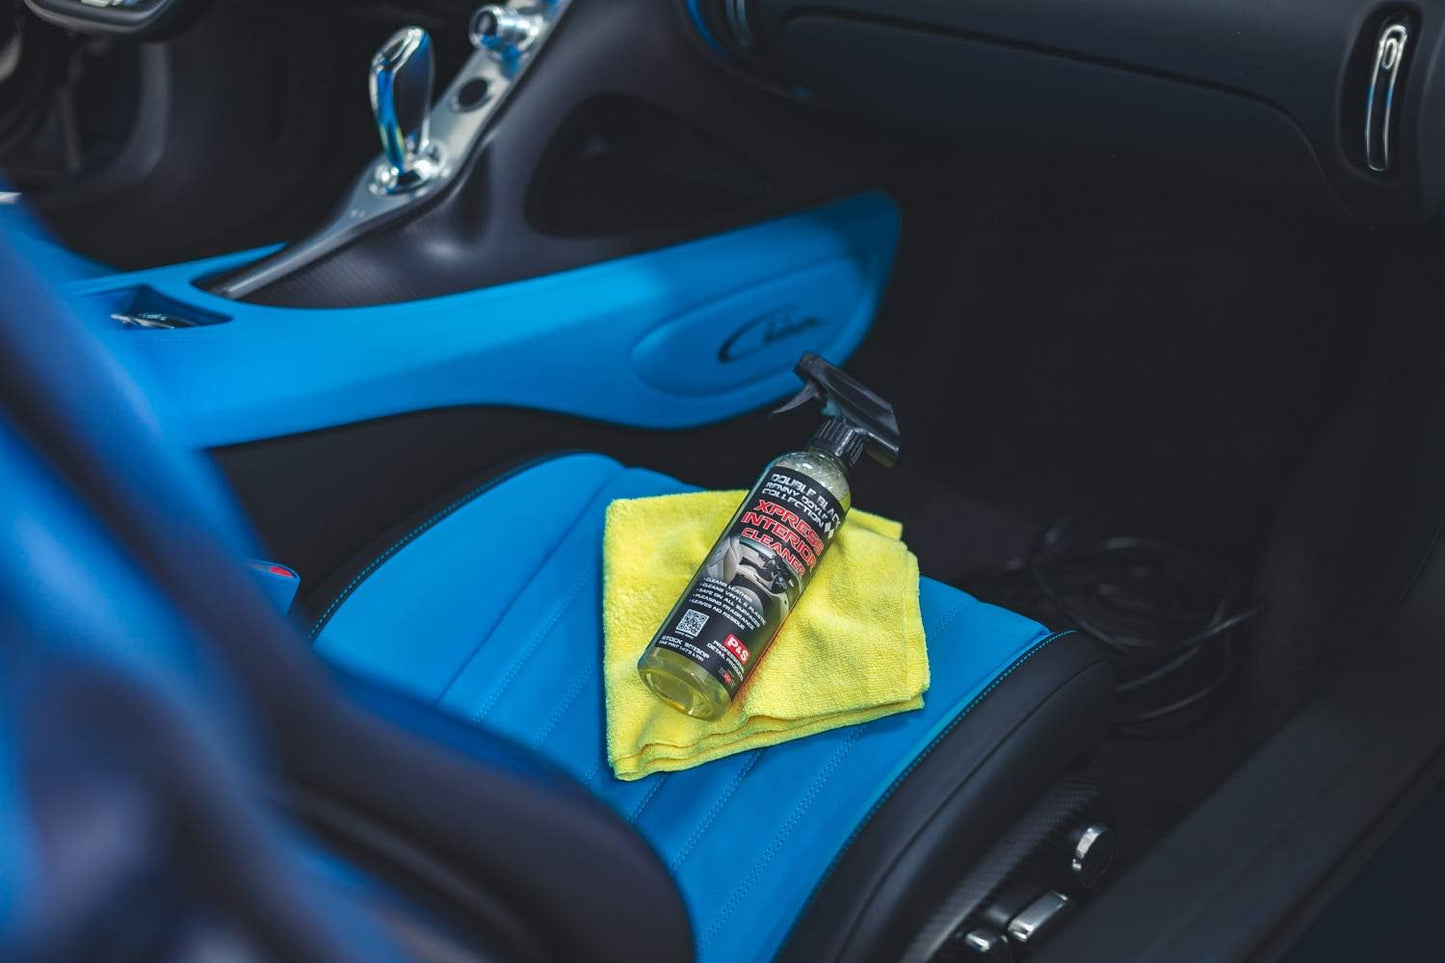 P&S Xpress Interior Cleaner - Auto Detailing Solution